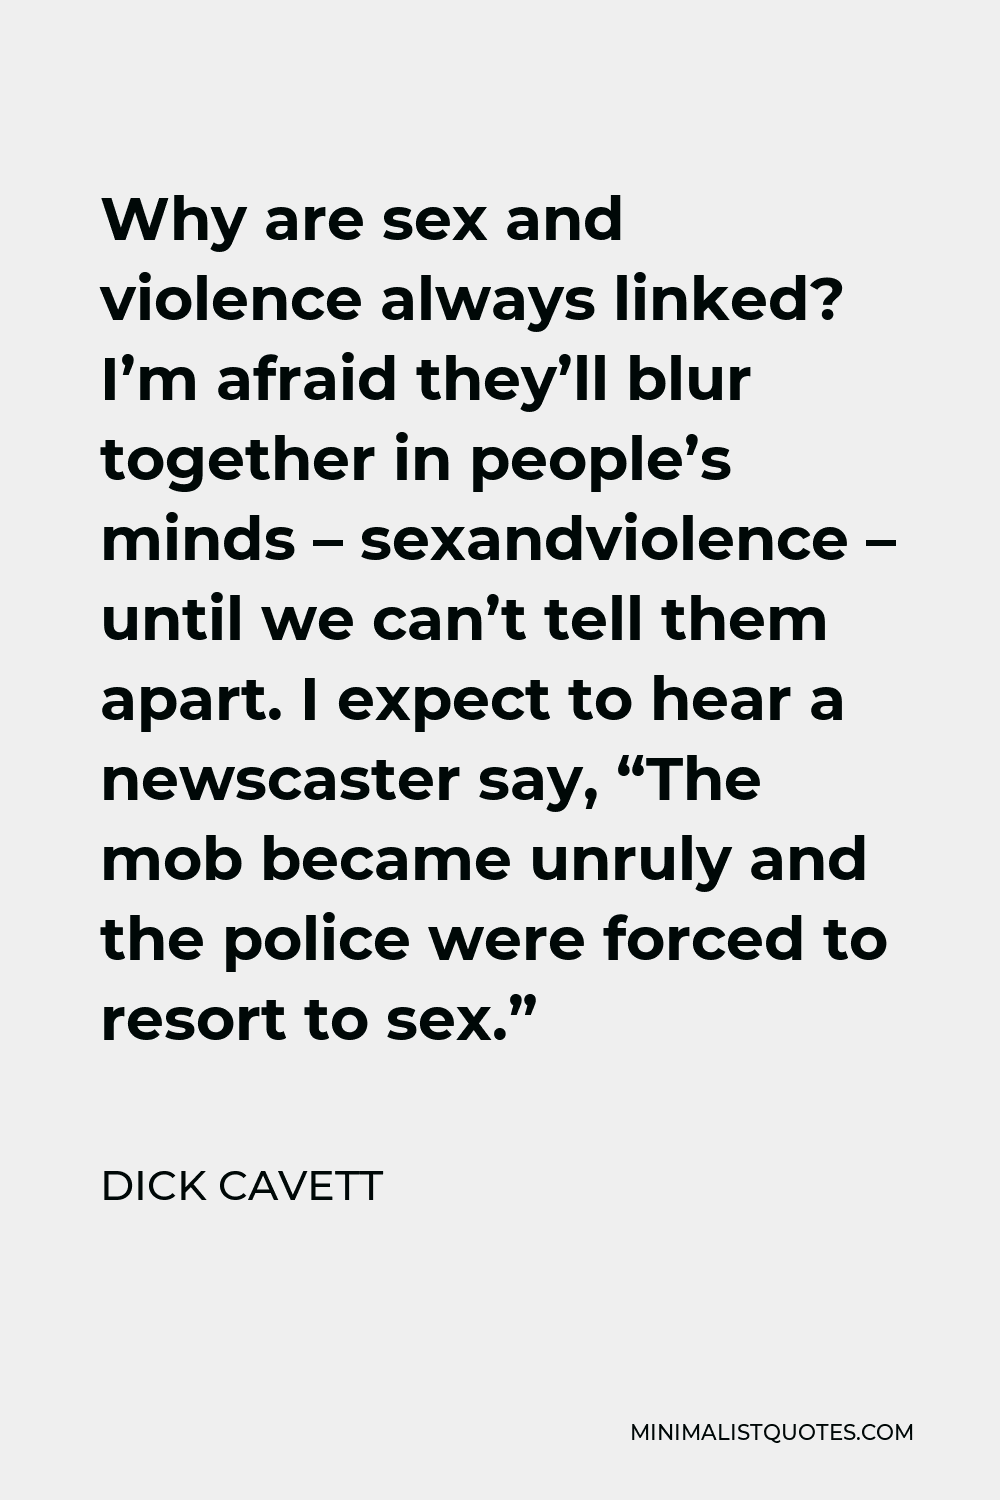 Dick Cavett Quote - Why are sex and violence always linked? I’m afraid they’ll blur together in people’s minds – sexandviolence – until we can’t tell them apart. I expect to hear a newscaster say, “The mob became unruly and the police were forced to resort to sex.”